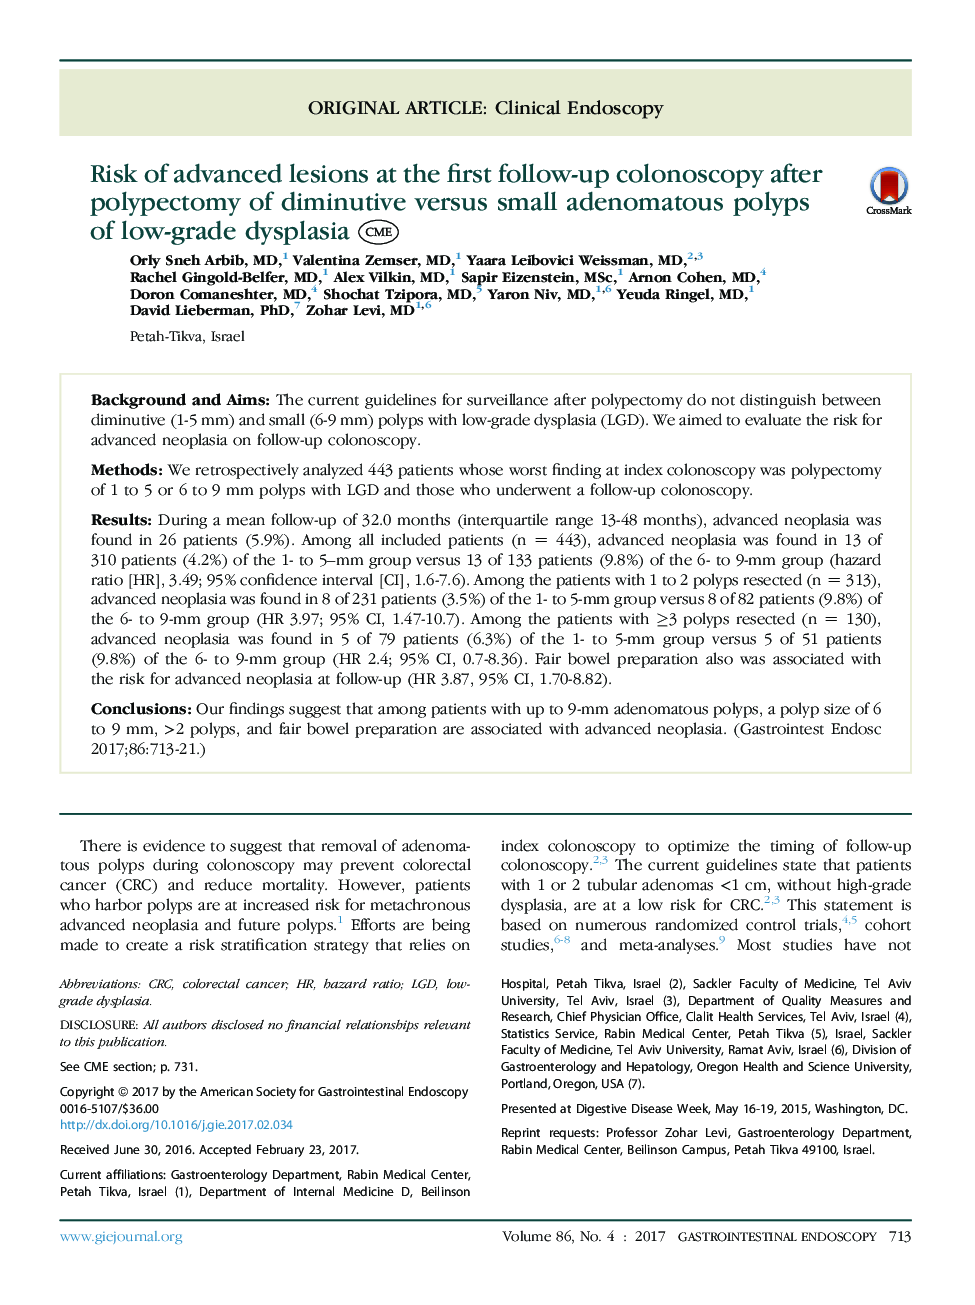 Risk of advanced lesions at the first follow-up colonoscopy after polypectomy of diminutive versus small adenomatous polyps of low-grade dysplasia